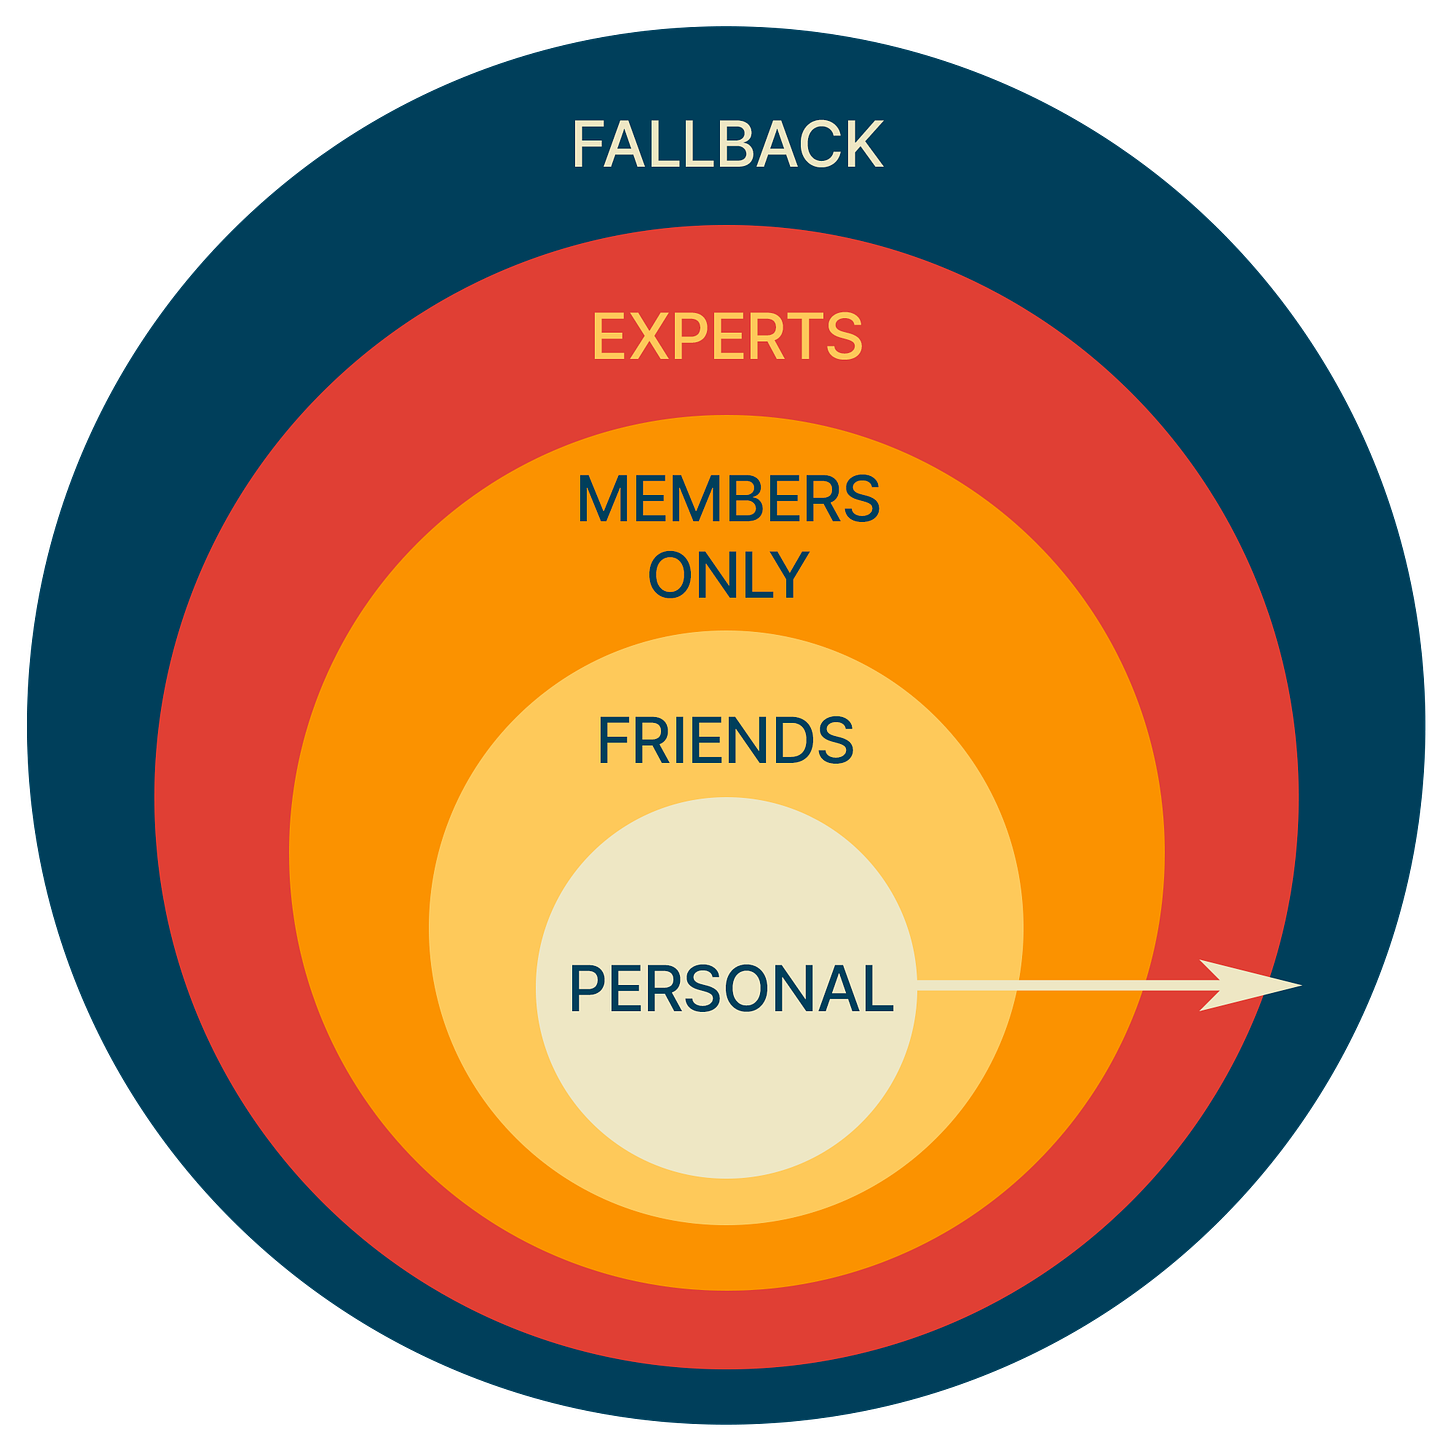 An infographic in a bullseye pattern showing, at the center, PERSONAL, then FRIENDS, MEMBERS ONLY, EXPERTS, then FALLBACK at the outside.